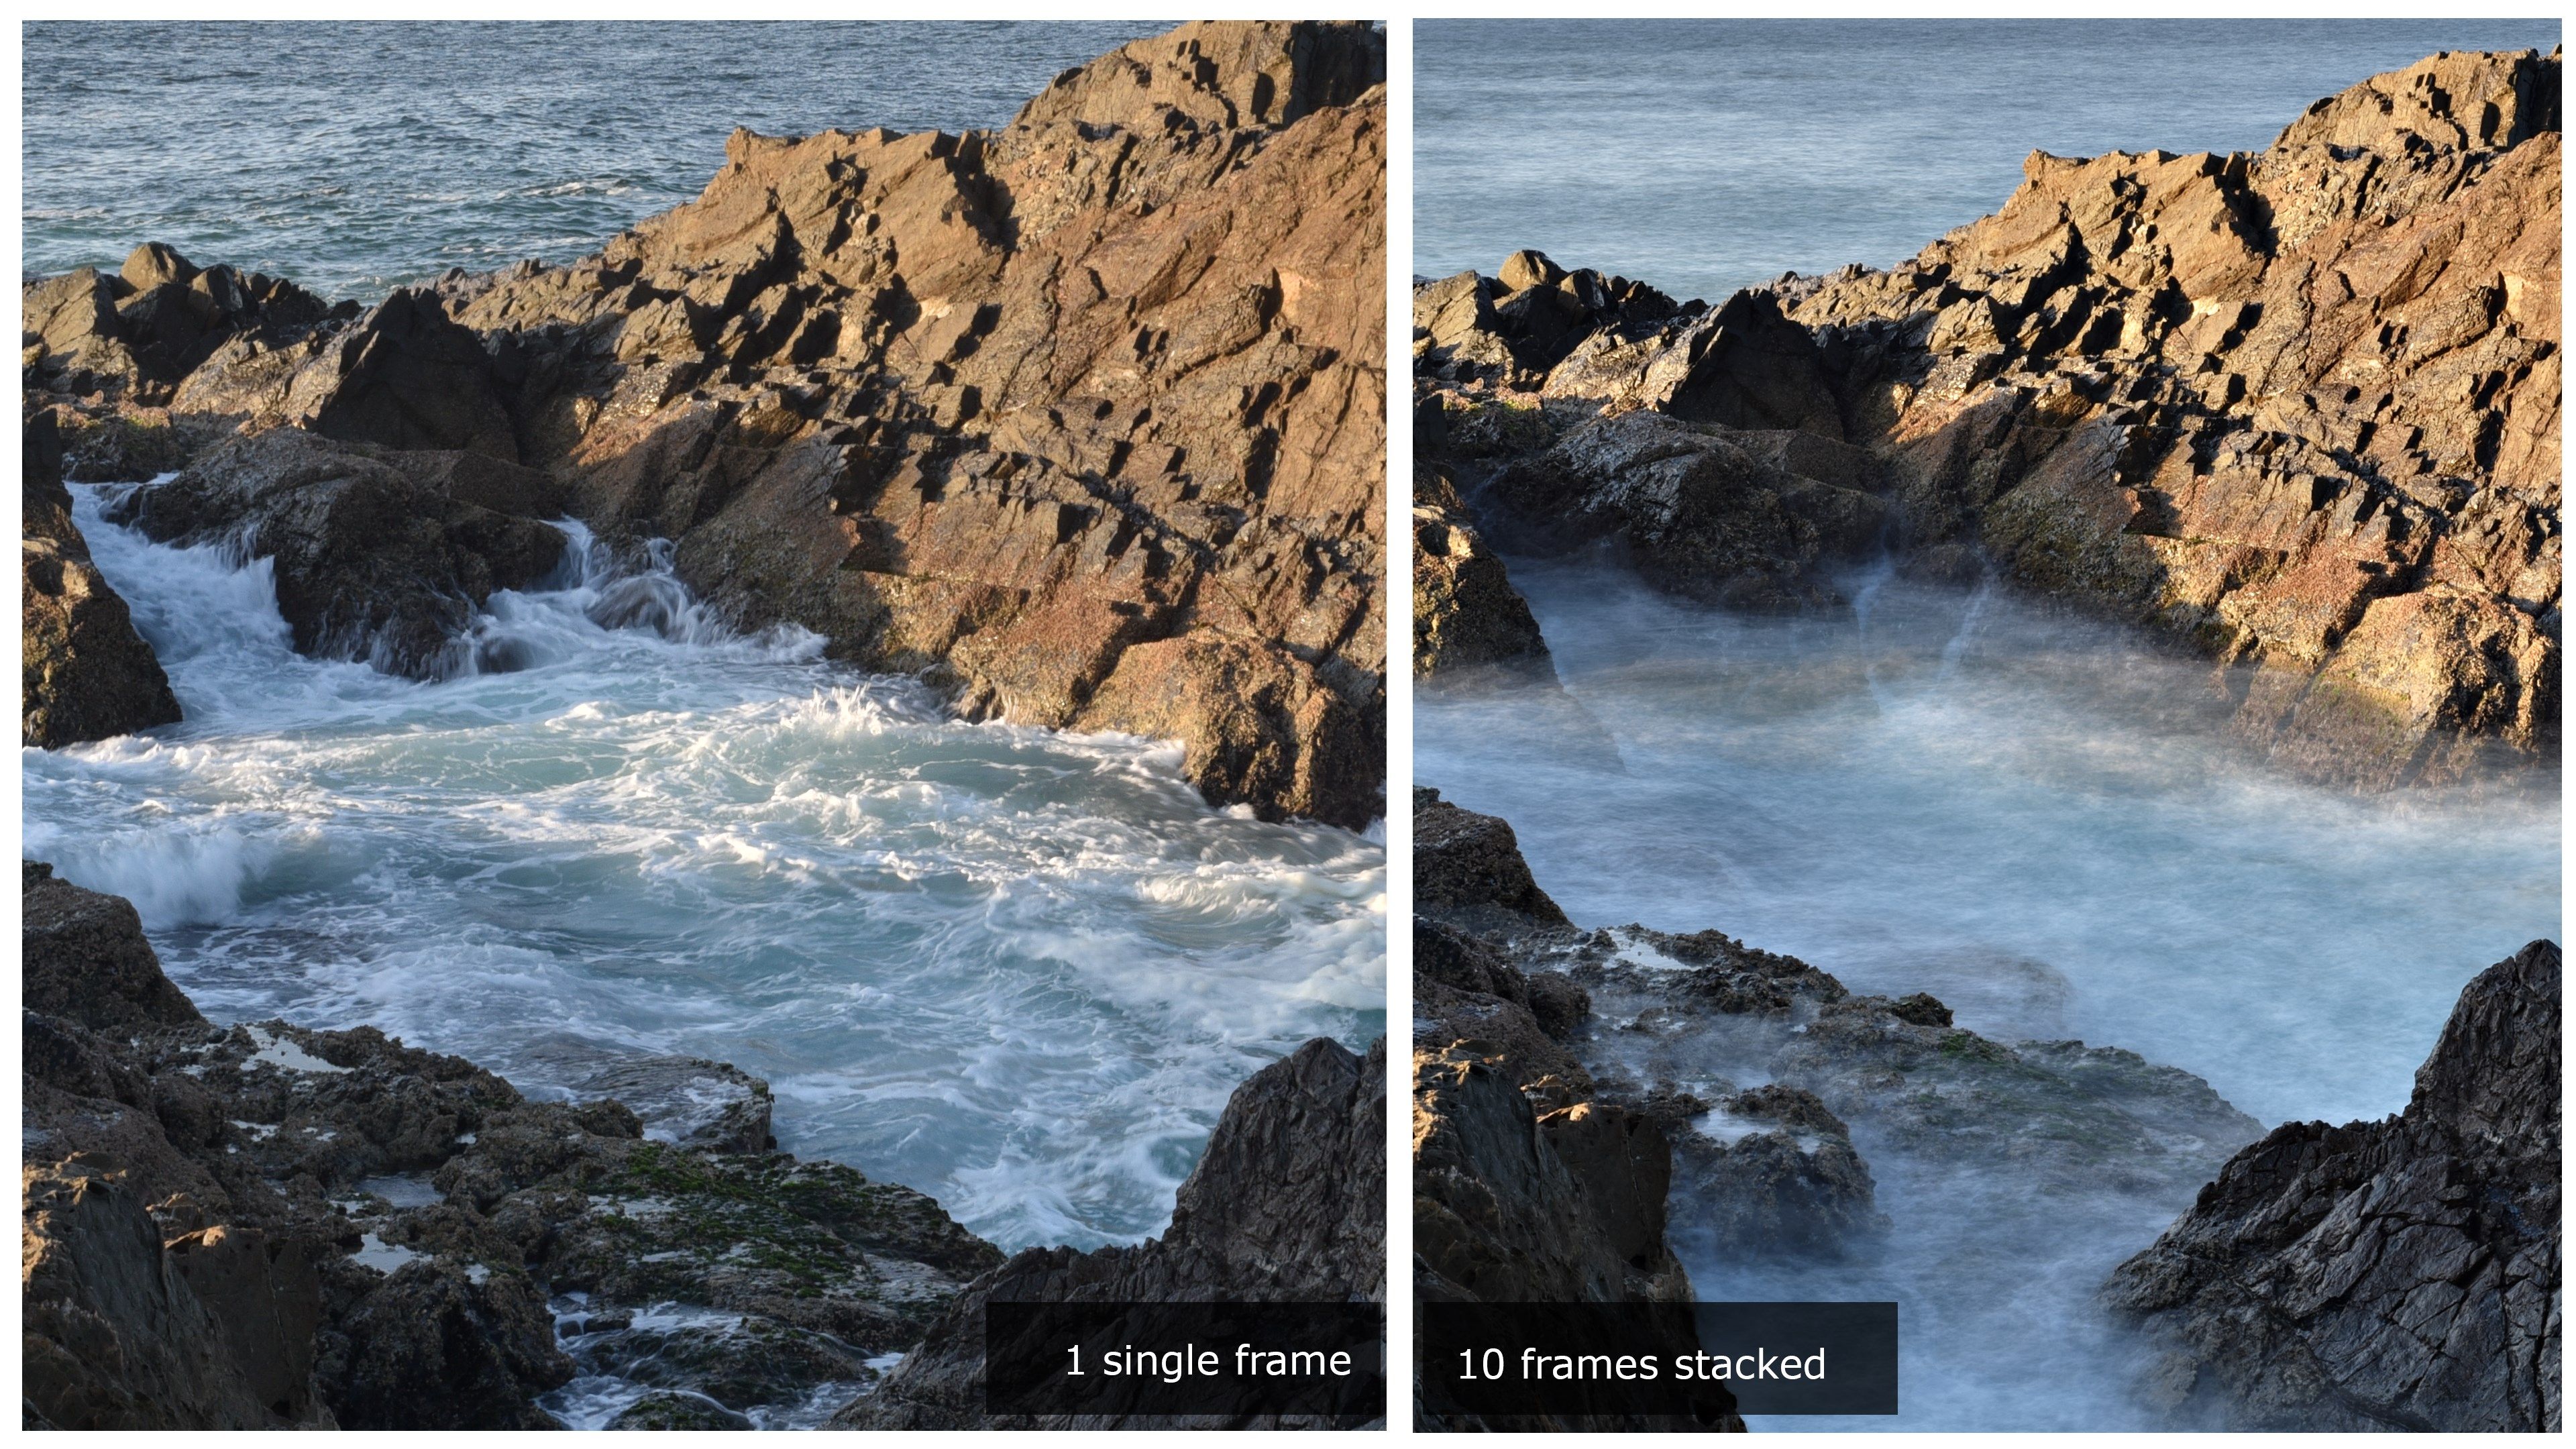 stack of 10 rock pool pic to smooth the rough sea